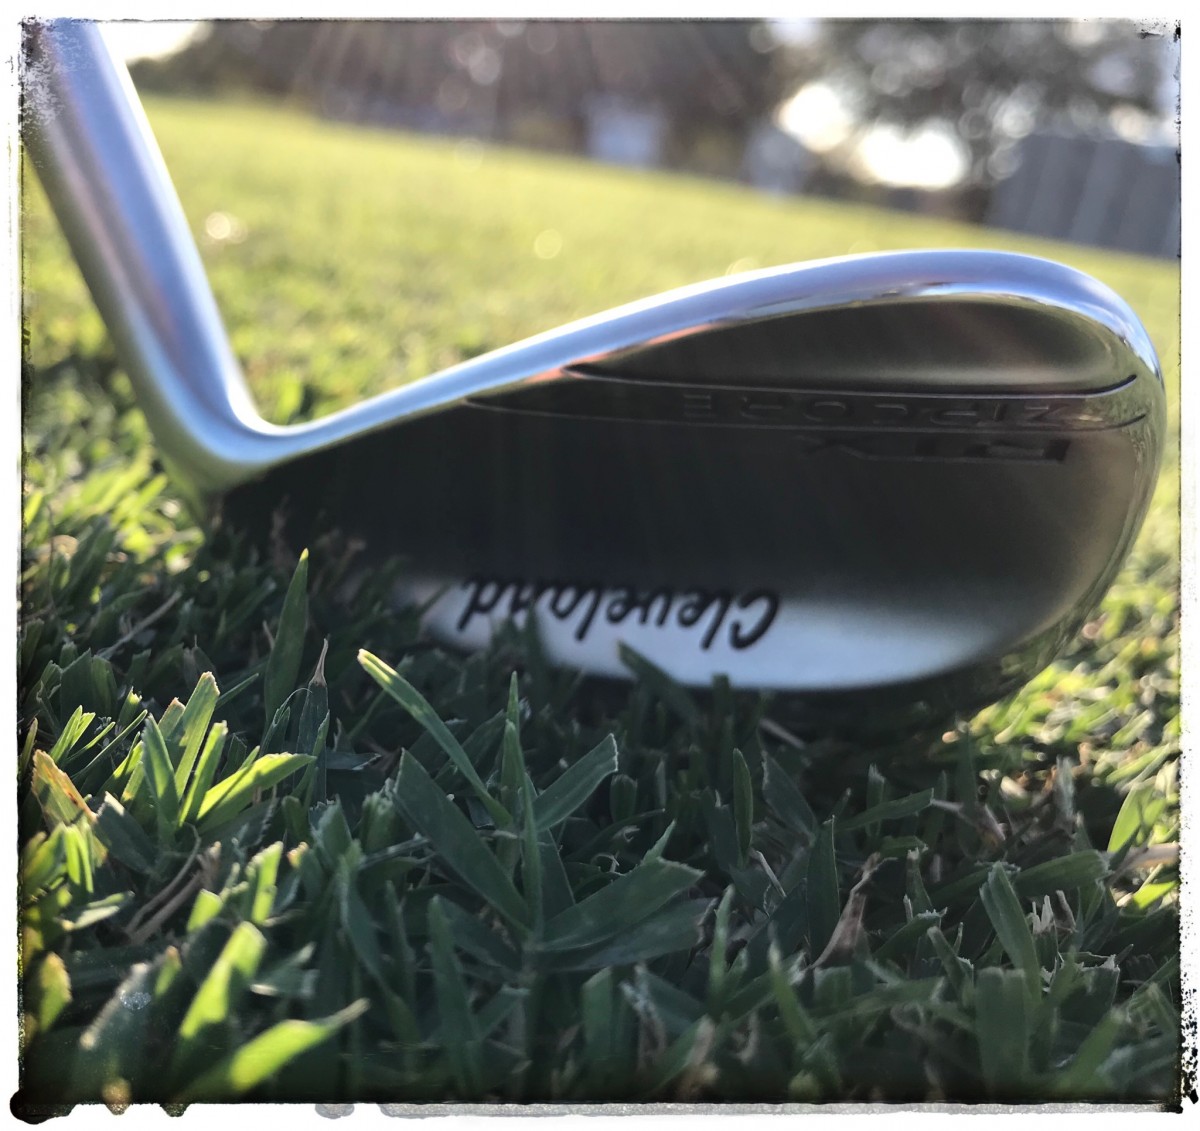 2020 Official Member Review: Cleveland RTX Zipcore wedges 